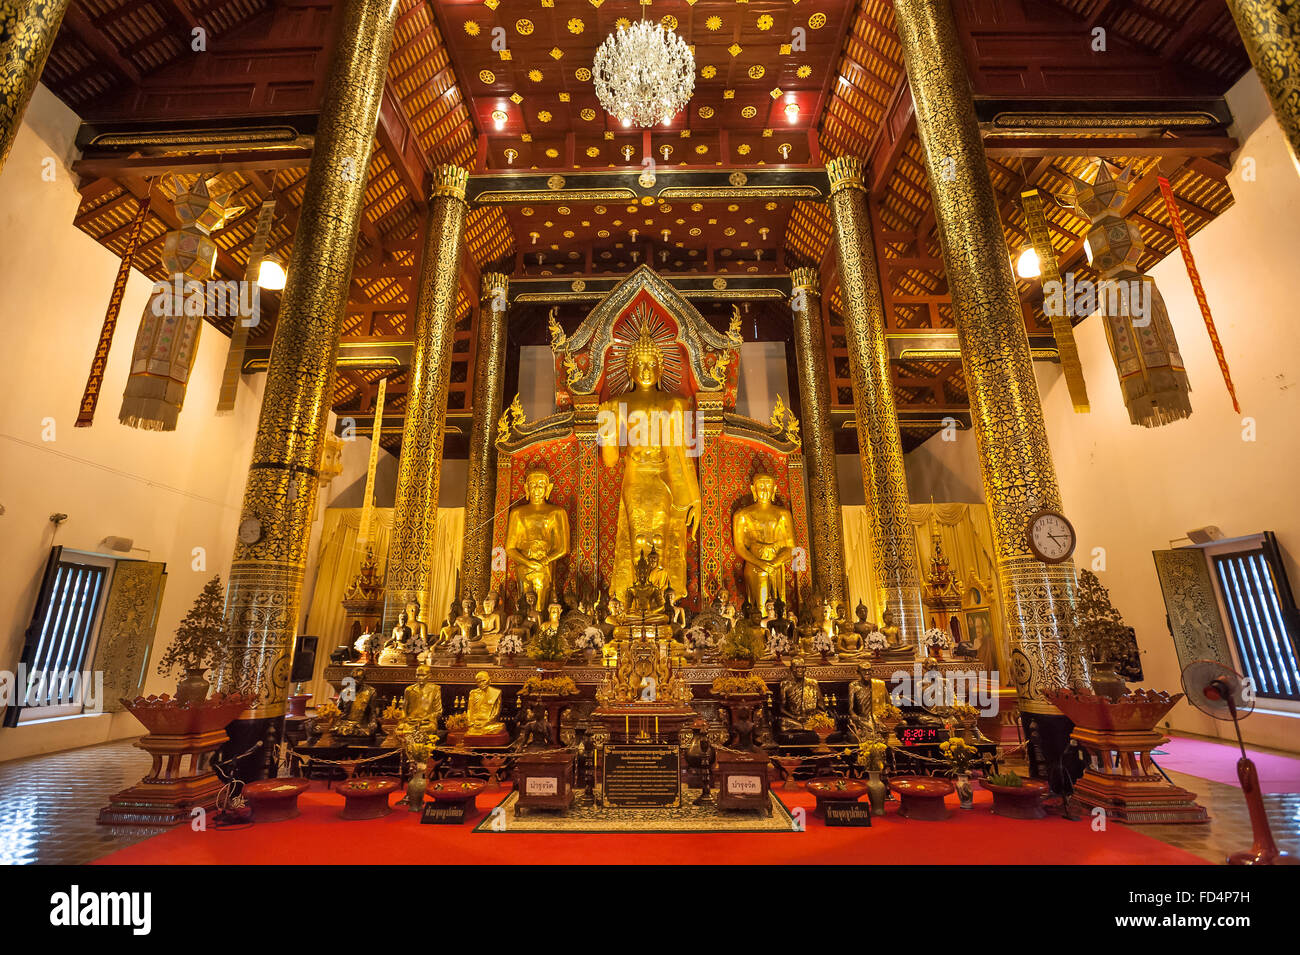 Innere des Wat Chedi Luang, Chiang Mai, Thailand Stockfoto